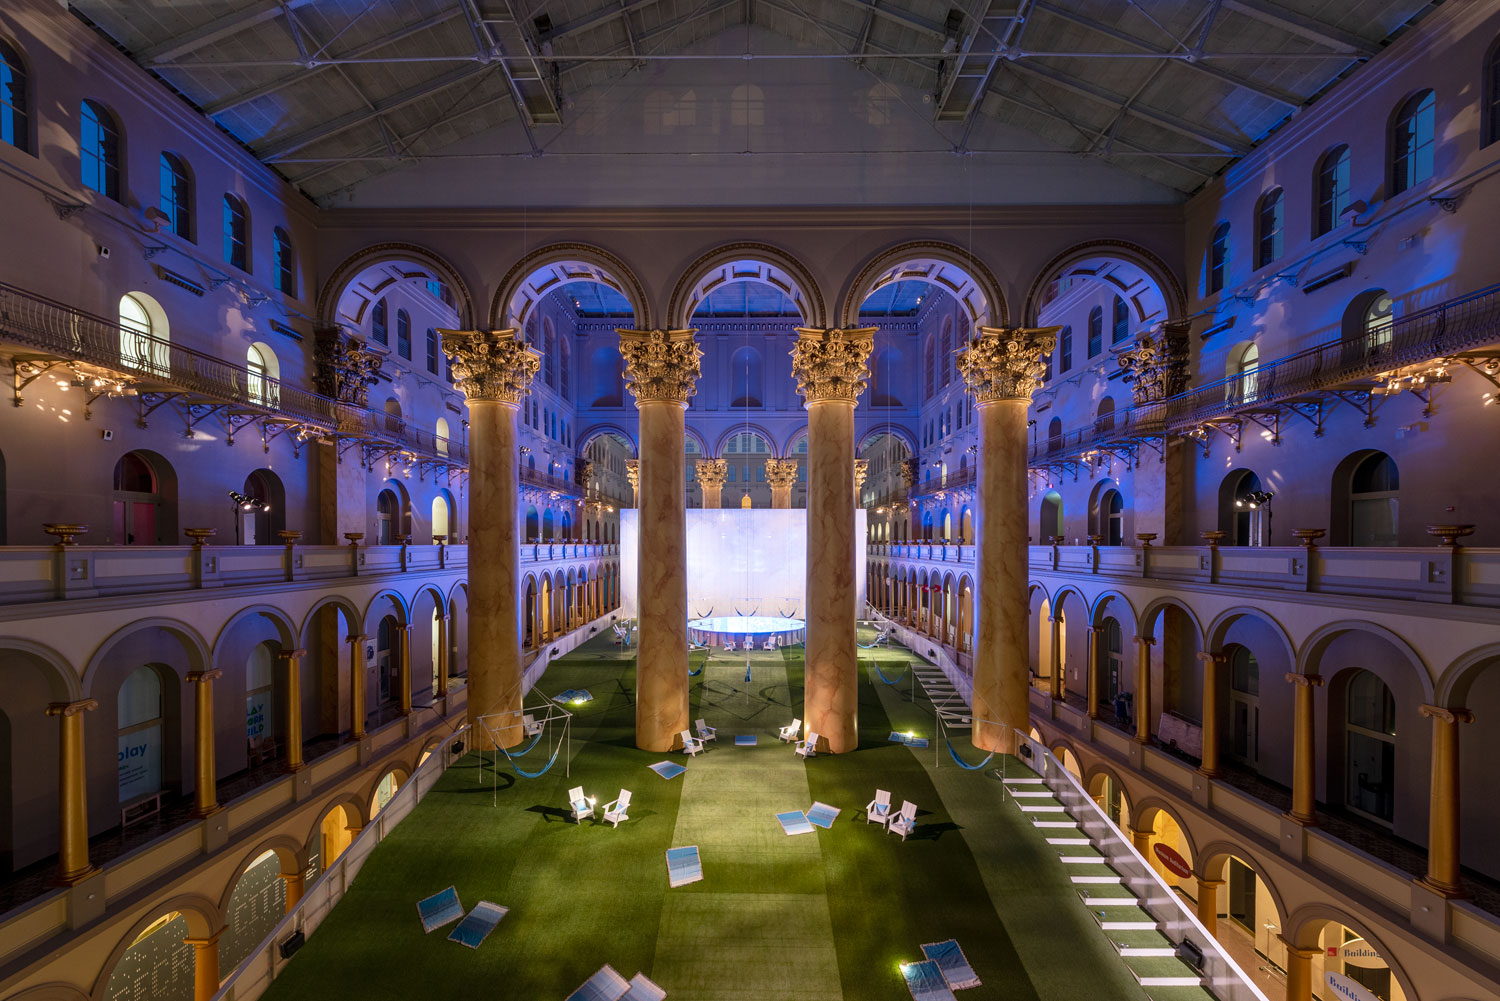 Inside of the National Building Museum, a lawn weaves between great pillars